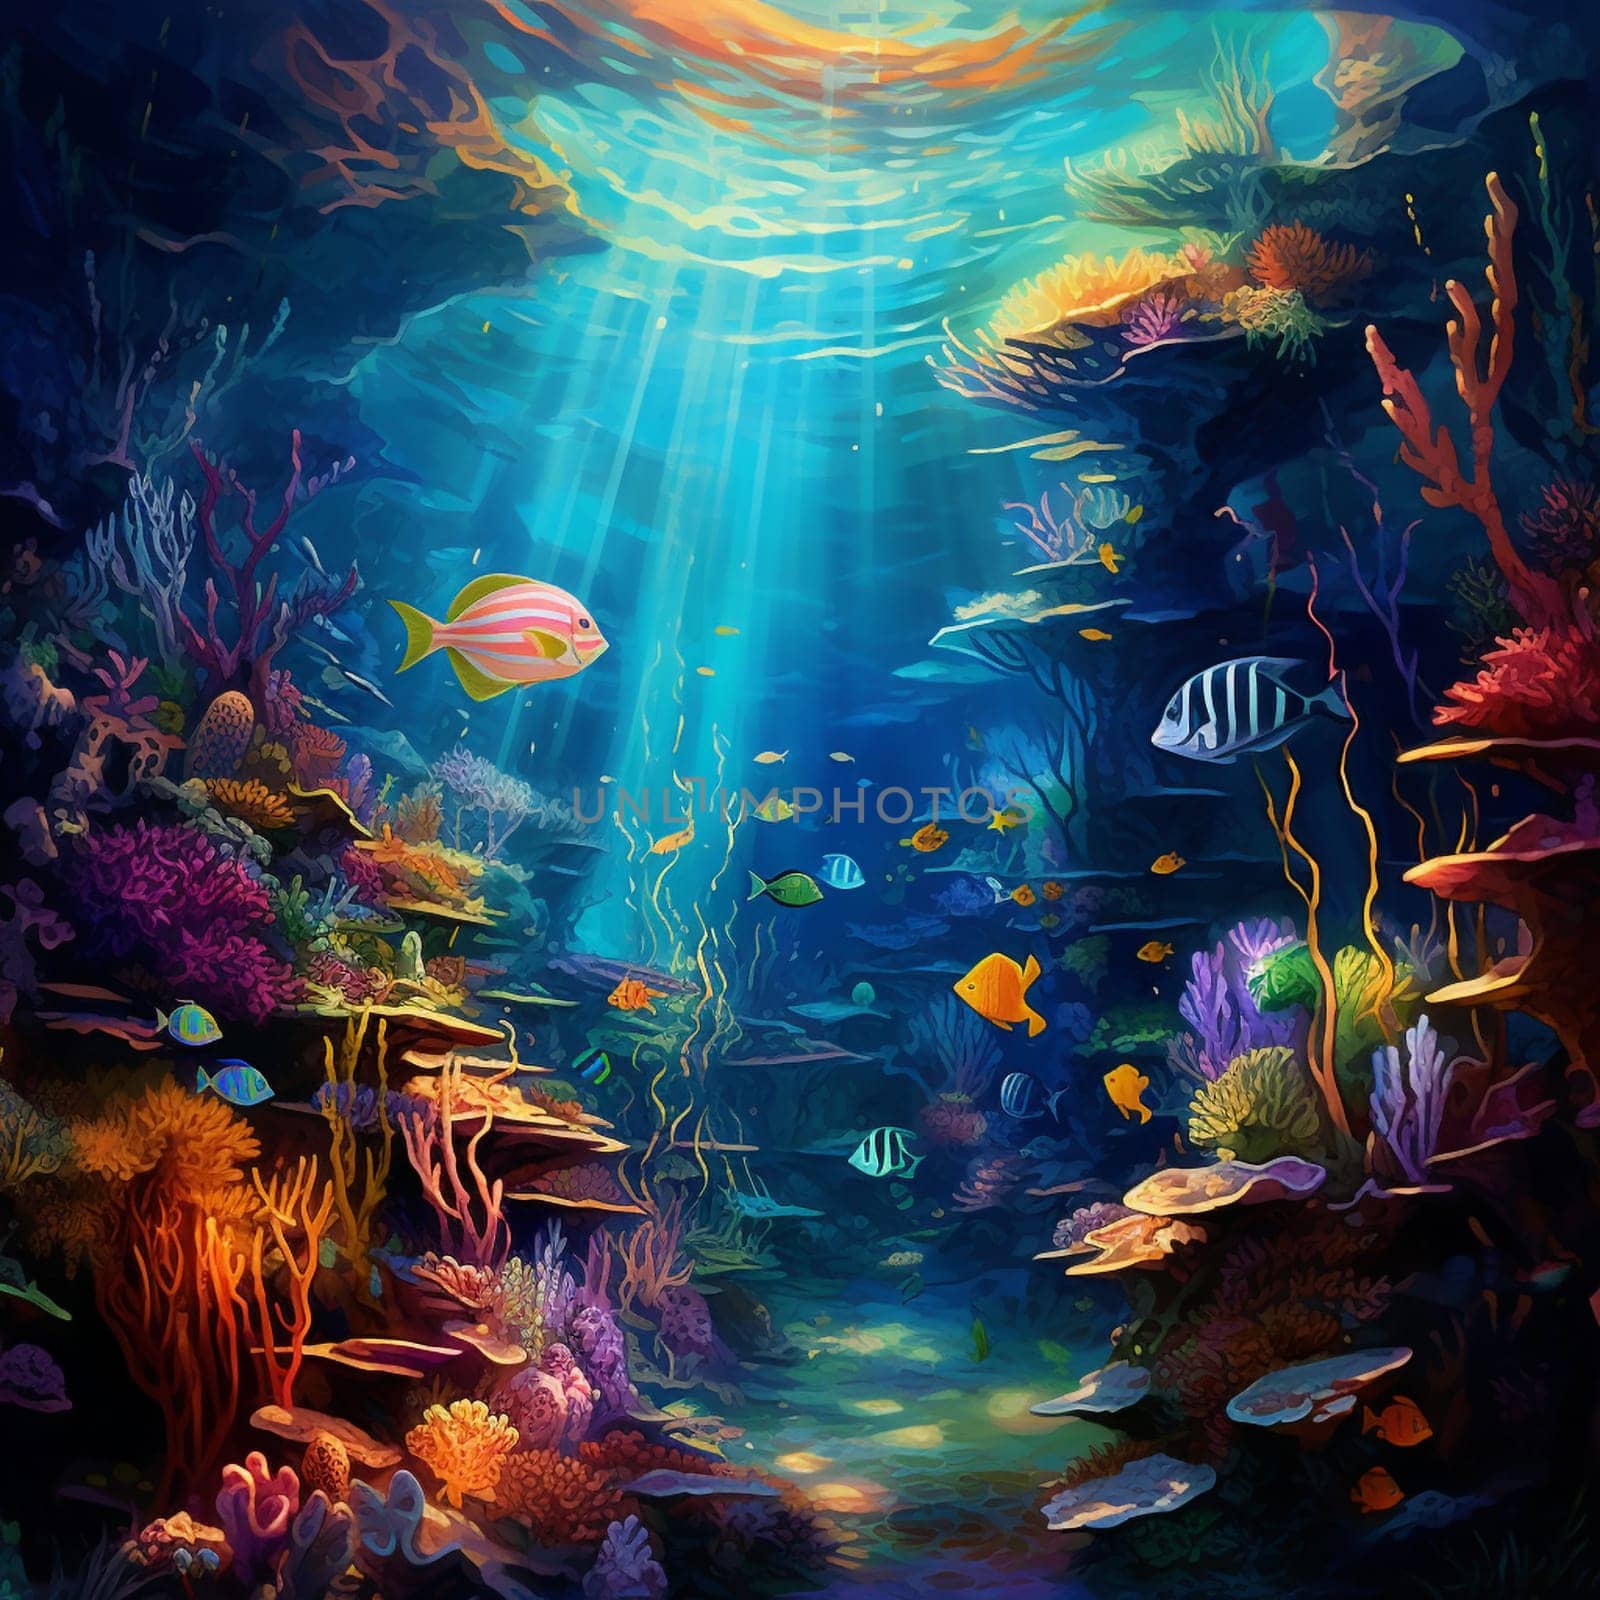 Embark on a mesmerizing visual journey into the enigmatic fathoms of the ocean with this surreal representation in an impressionist art style. The image captures the awe-inspiring beauty of underwater life, featuring vibrant colors and ethereal lighting that transport viewers to tropical coral reefs, where exotic sea creatures dwell amidst mysterious underwater caves. Encapsulating the untamed mysteries that lie beneath the ocean's surface, this artwork evokes a sense of wonder and curiosity, leaving viewers captivated by the unknown wonders of the deep sea.